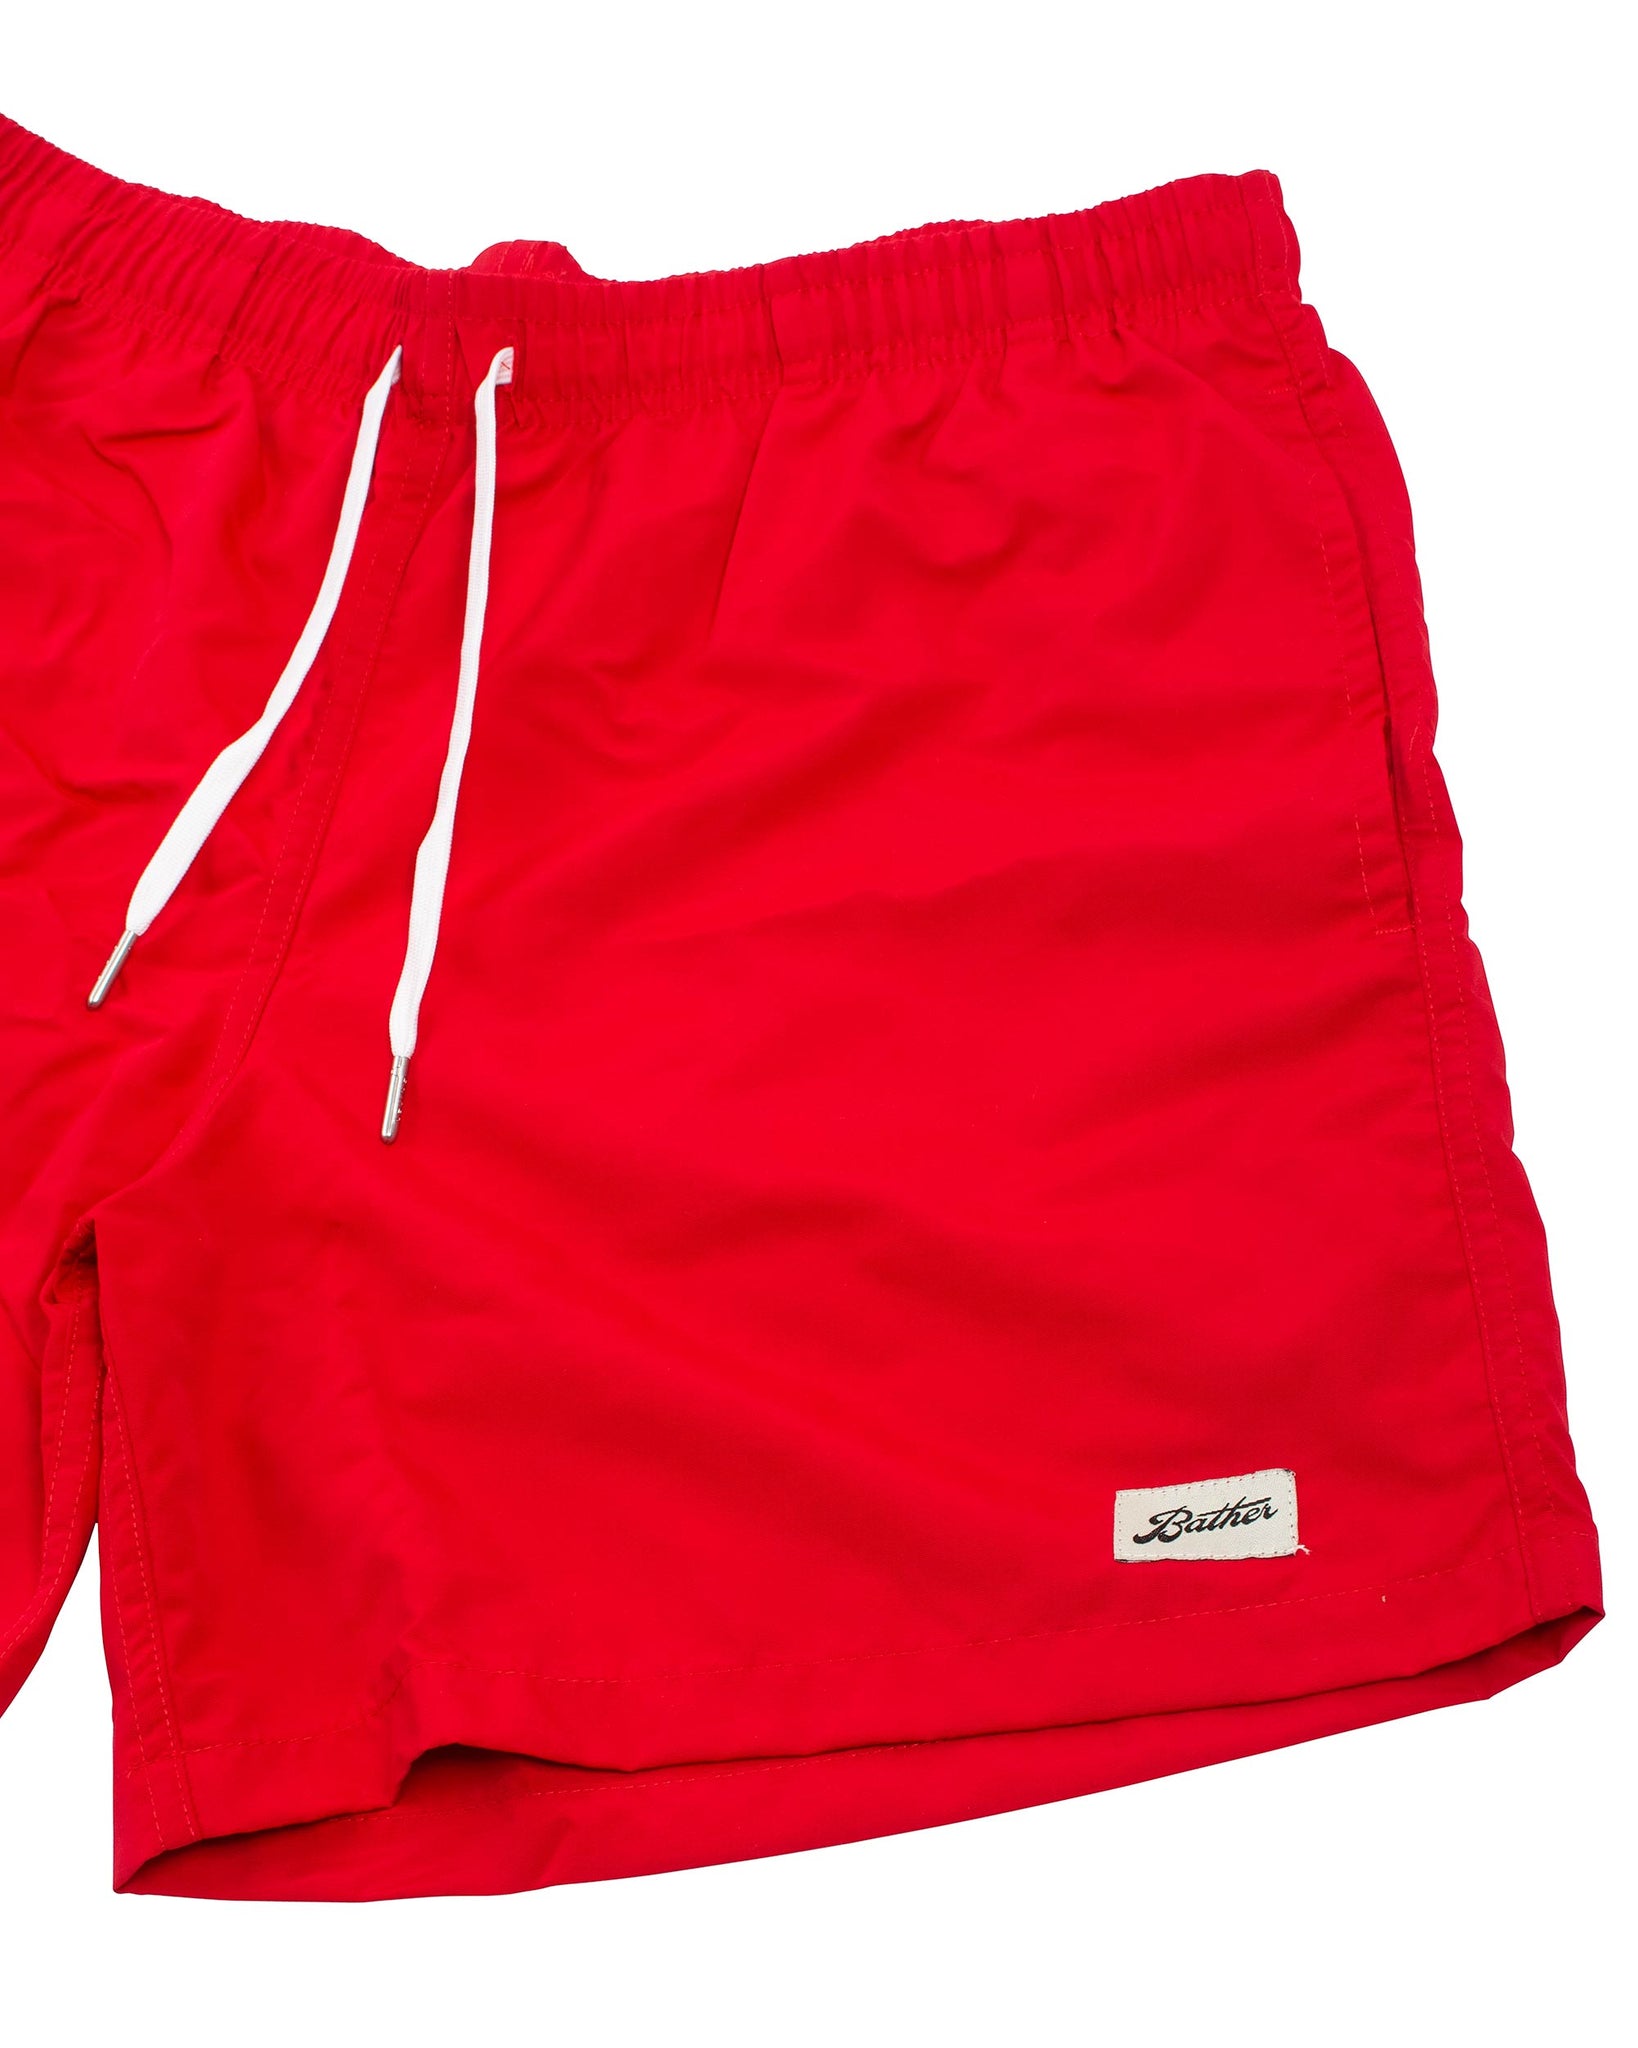 Bather Solid Red Swim Trunk Details